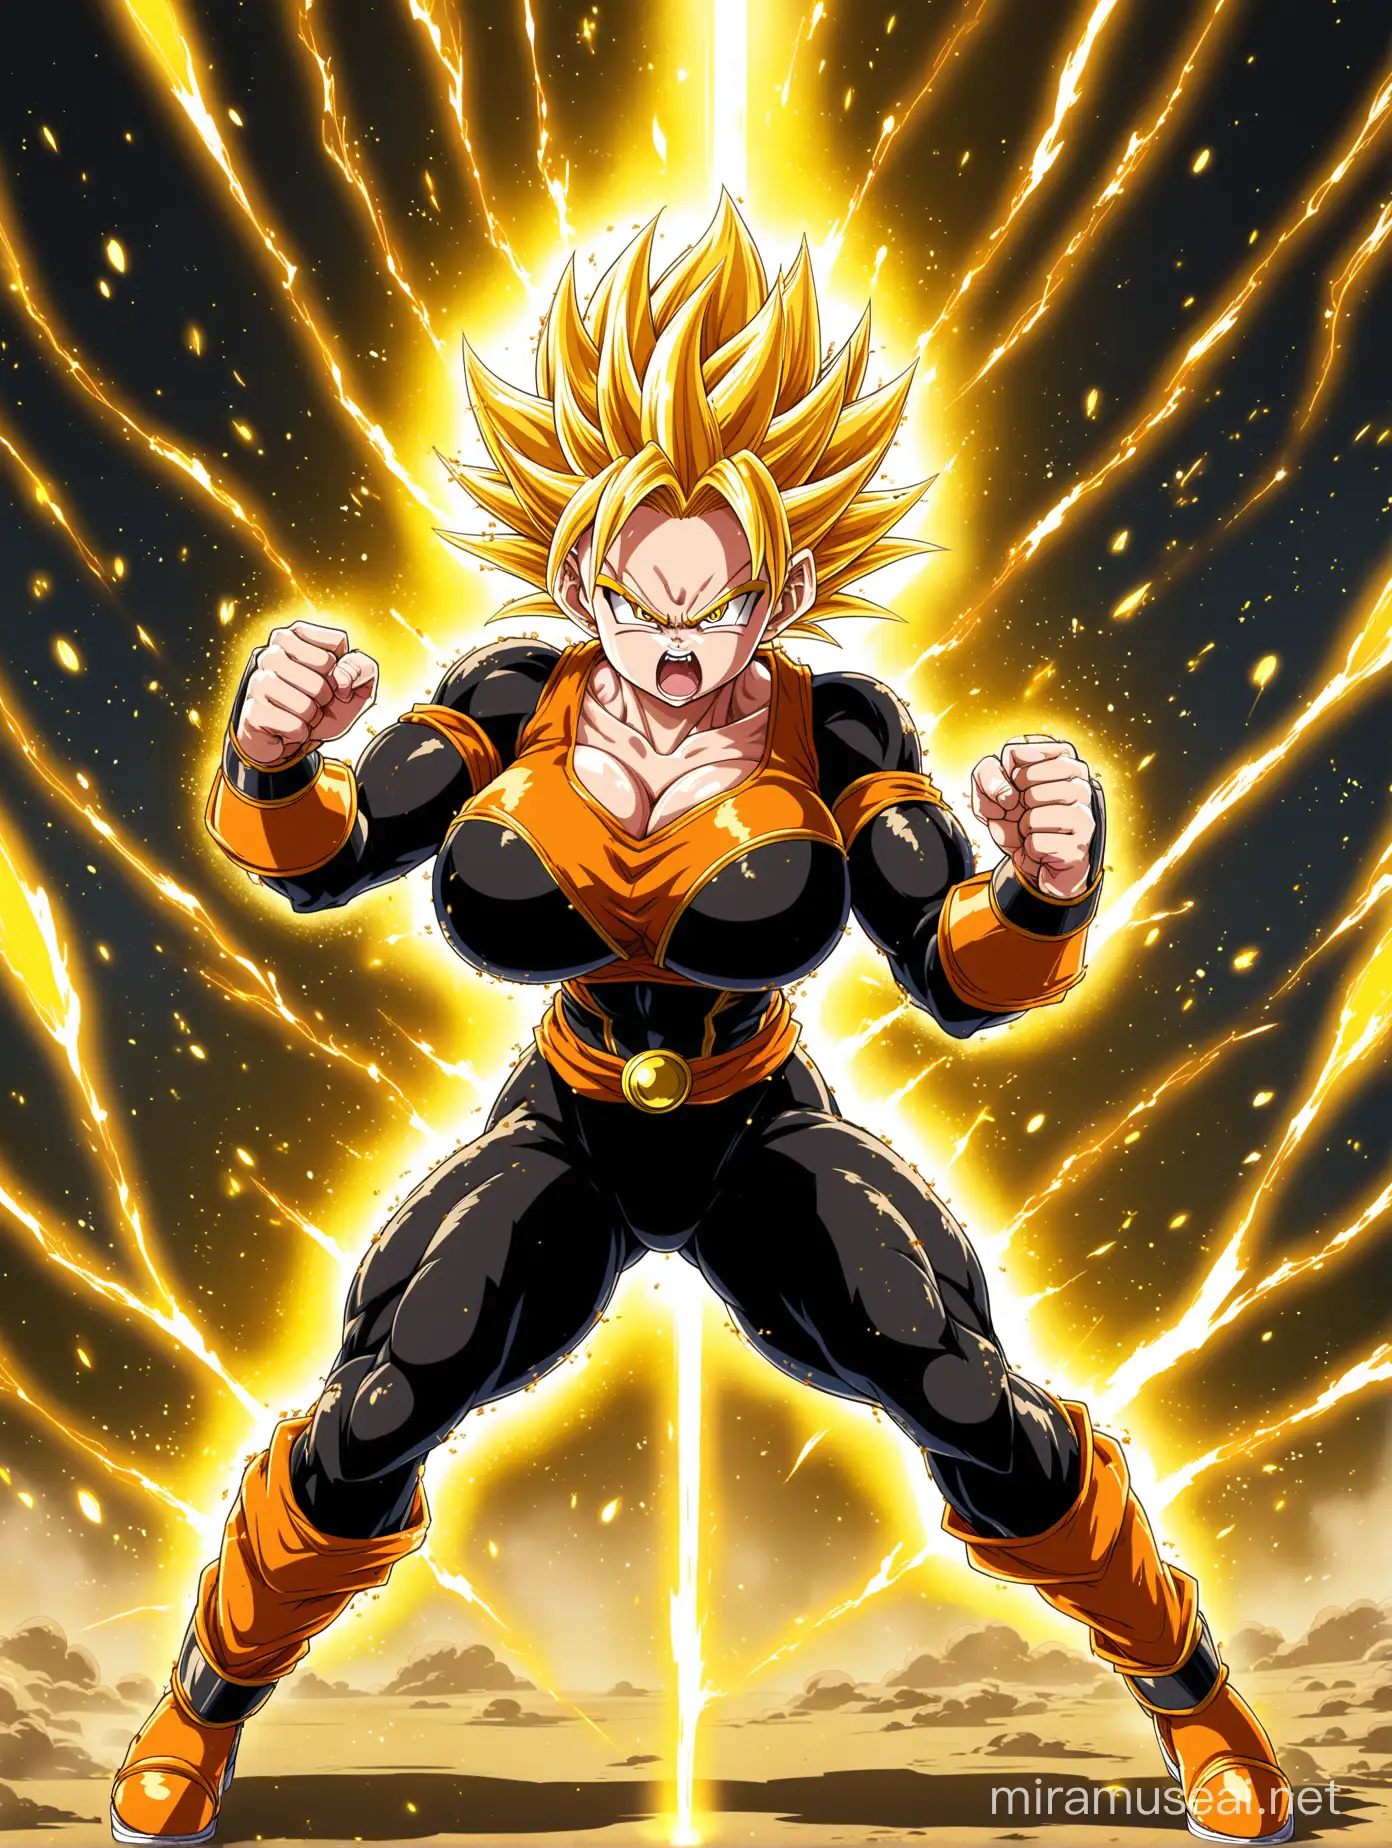 a female saiyan, black suit with orange edges, angry, golden hair, monkey tail, yellow power aura, power particles, dragon ball z, full body, huge breasts, strong legs, fighting stance.
